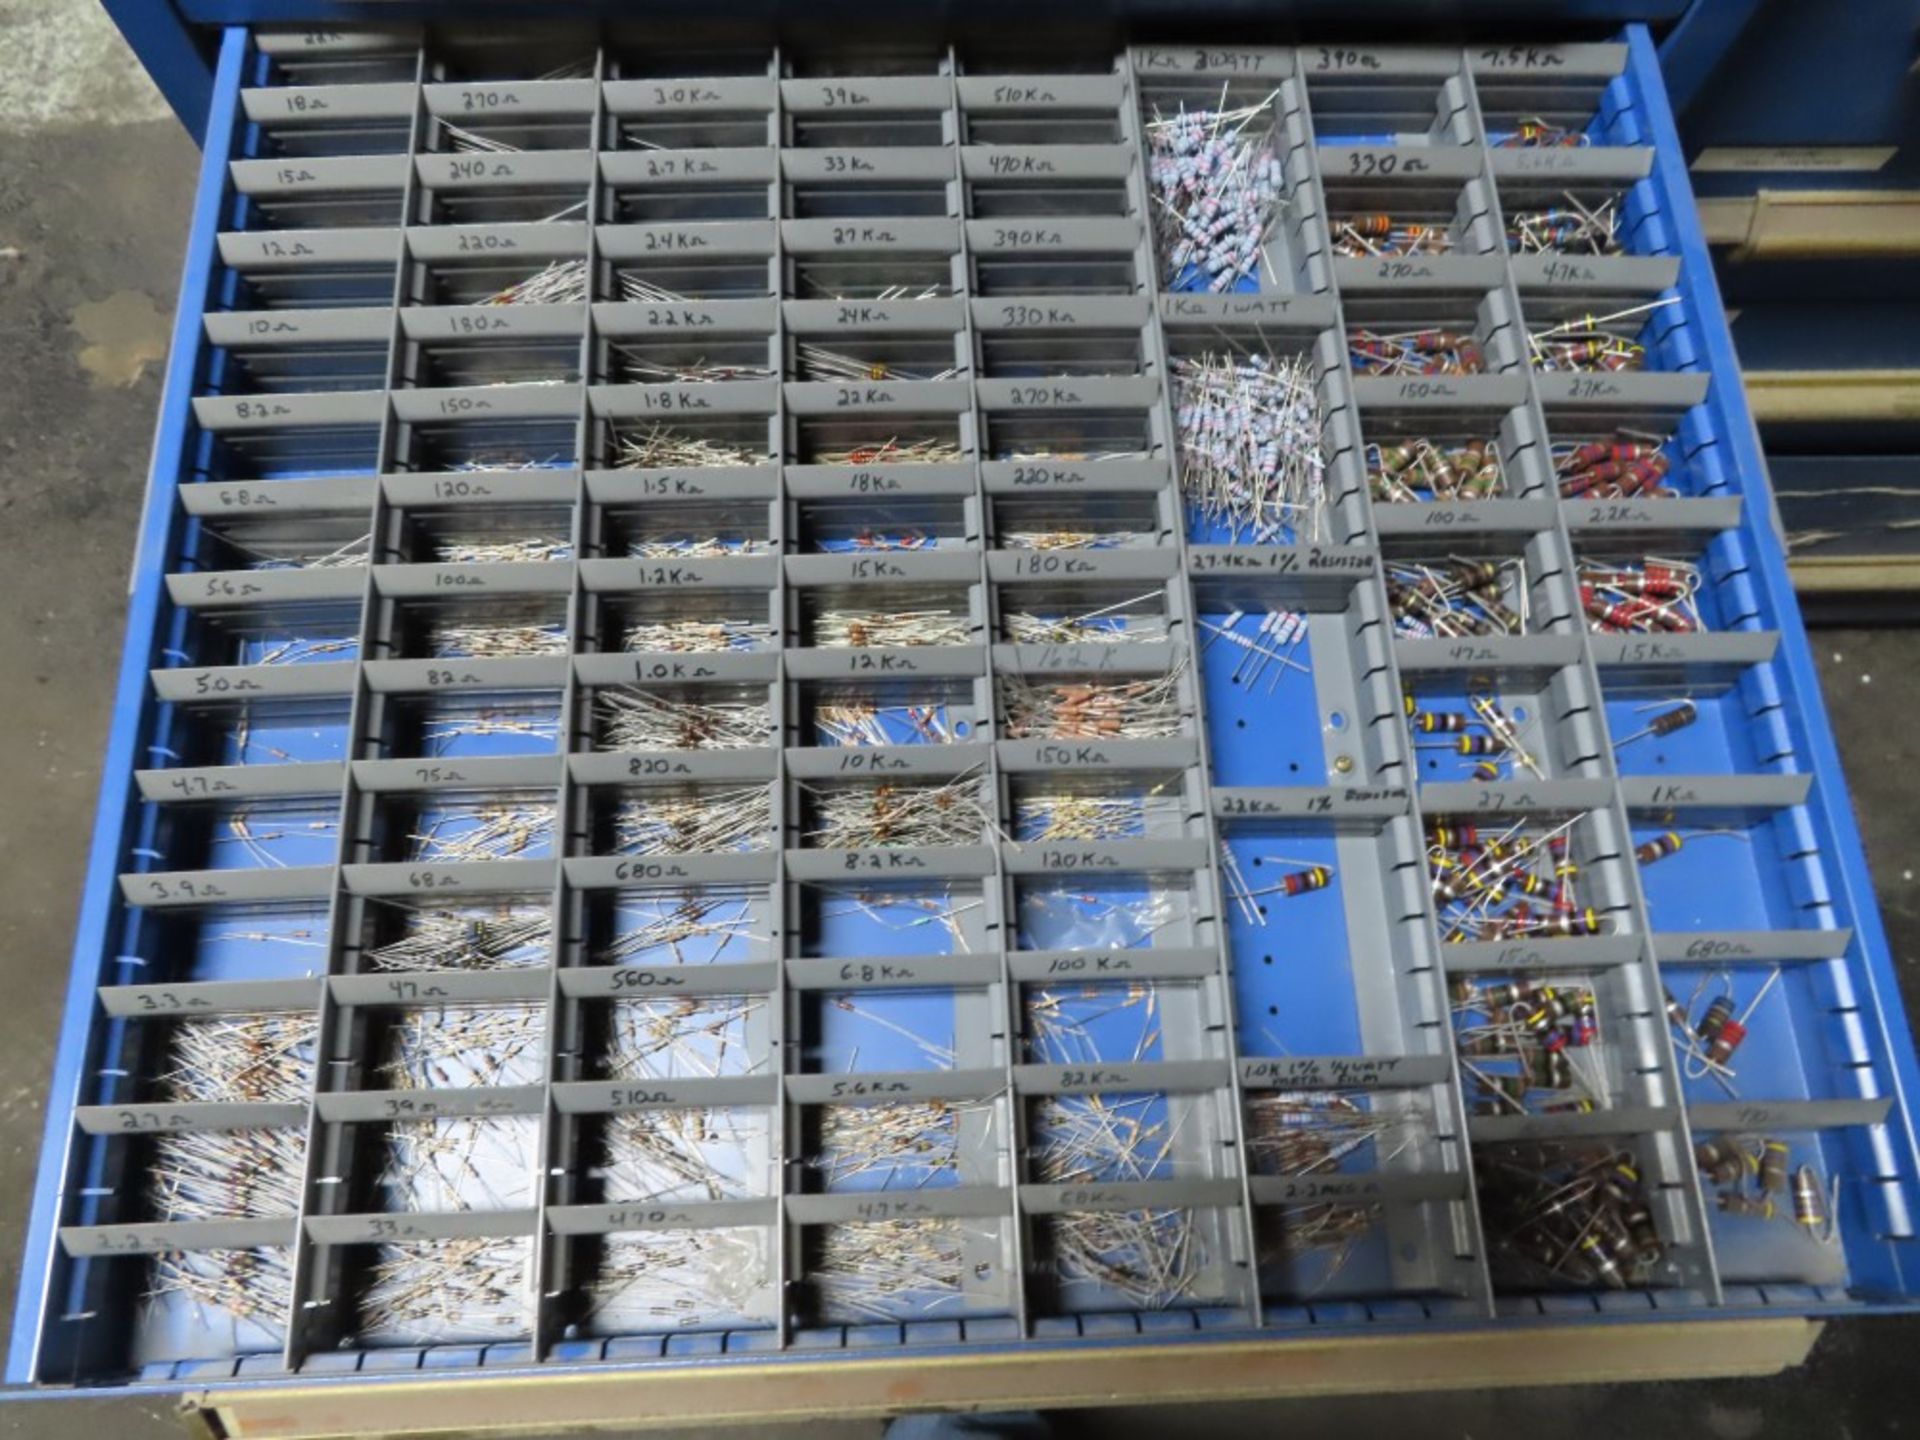 EQUIPTO 16-DRAWER CABINET, W/ CEPROM CHIPS, CAPACITORS, RESISTORS, DIODES, ELECTRICAL COMPONENTS - Image 2 of 4